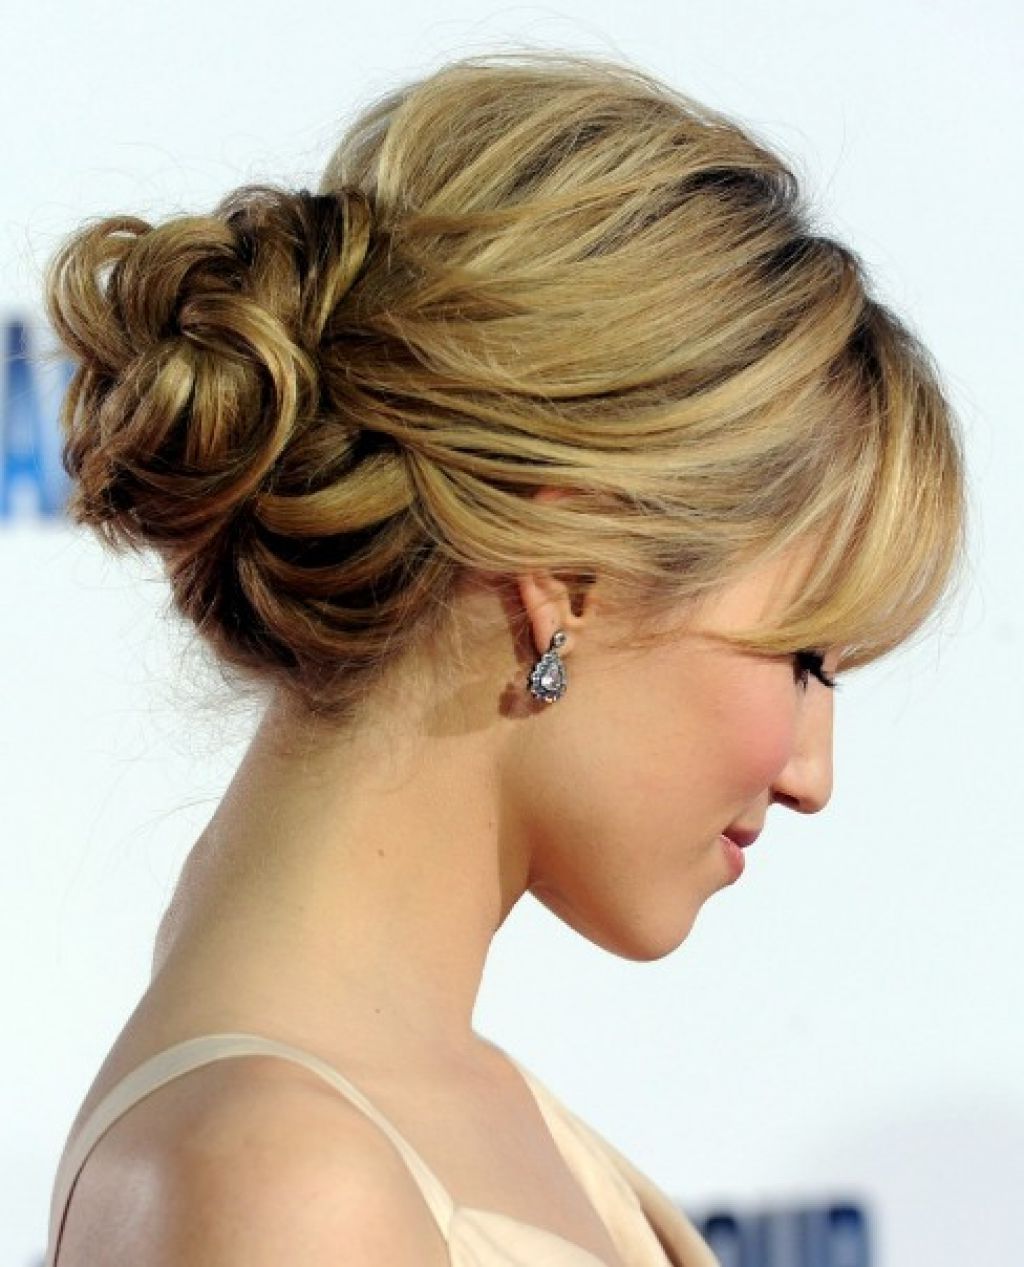 Romantic Loose Low Bun Updo For Wedding From Dianna Agron | Wedding Intended For Low Bun Updo Hairstyles For Wedding (View 2 of 15)